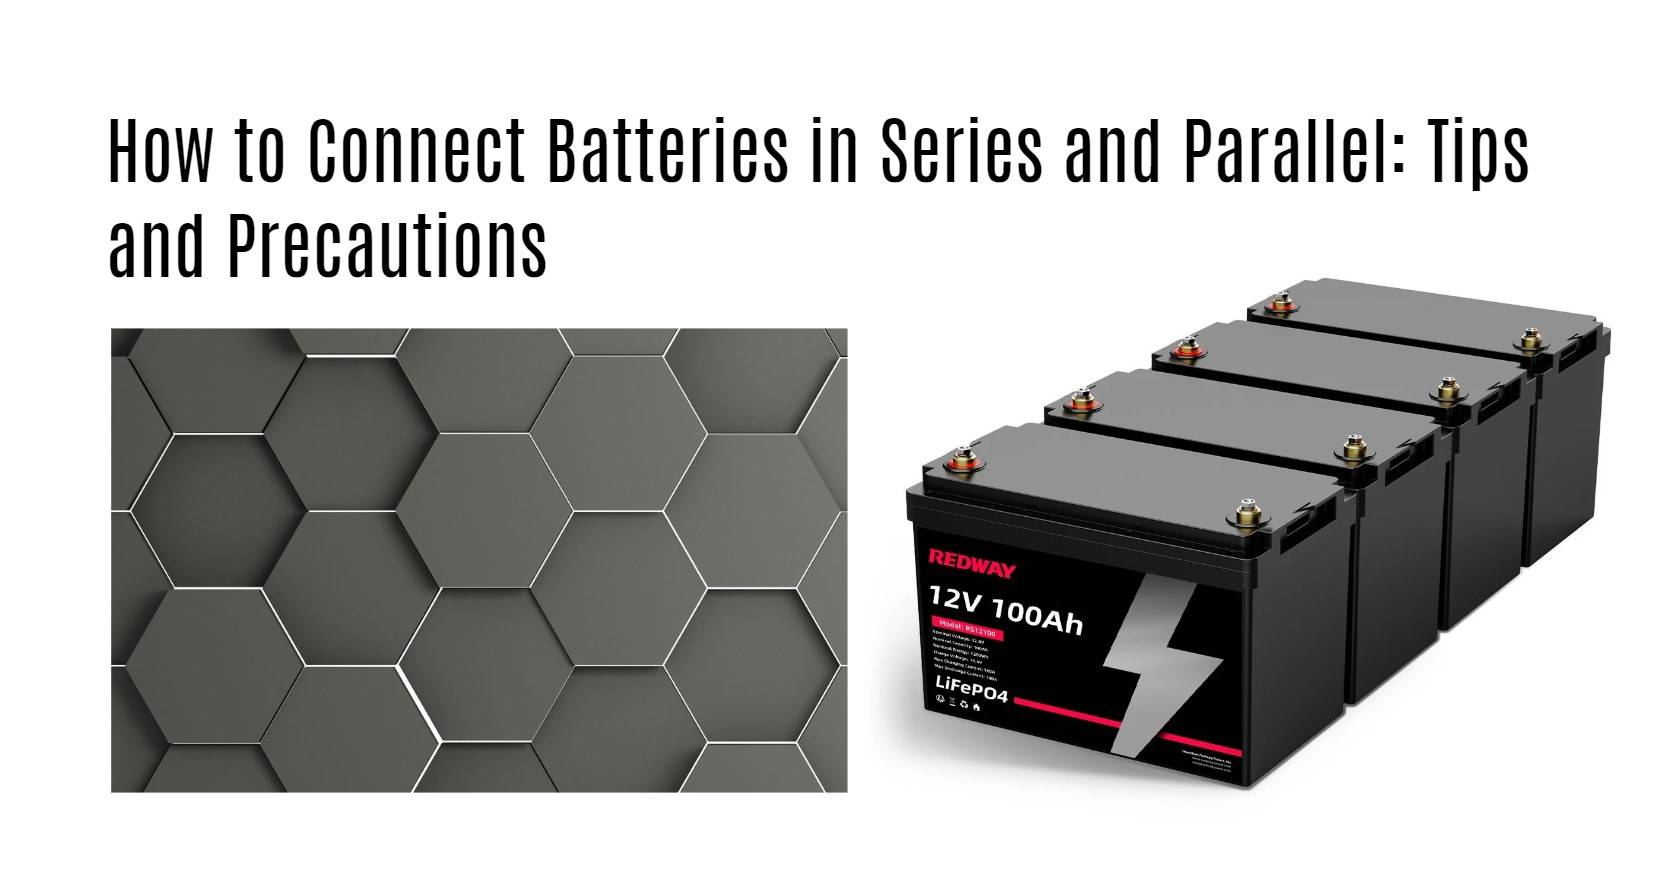 How to Connect Batteries in Series and Parallel: Tips and Precautions 12v 100ah rv lithium battery factory oem manufacturer marine boat